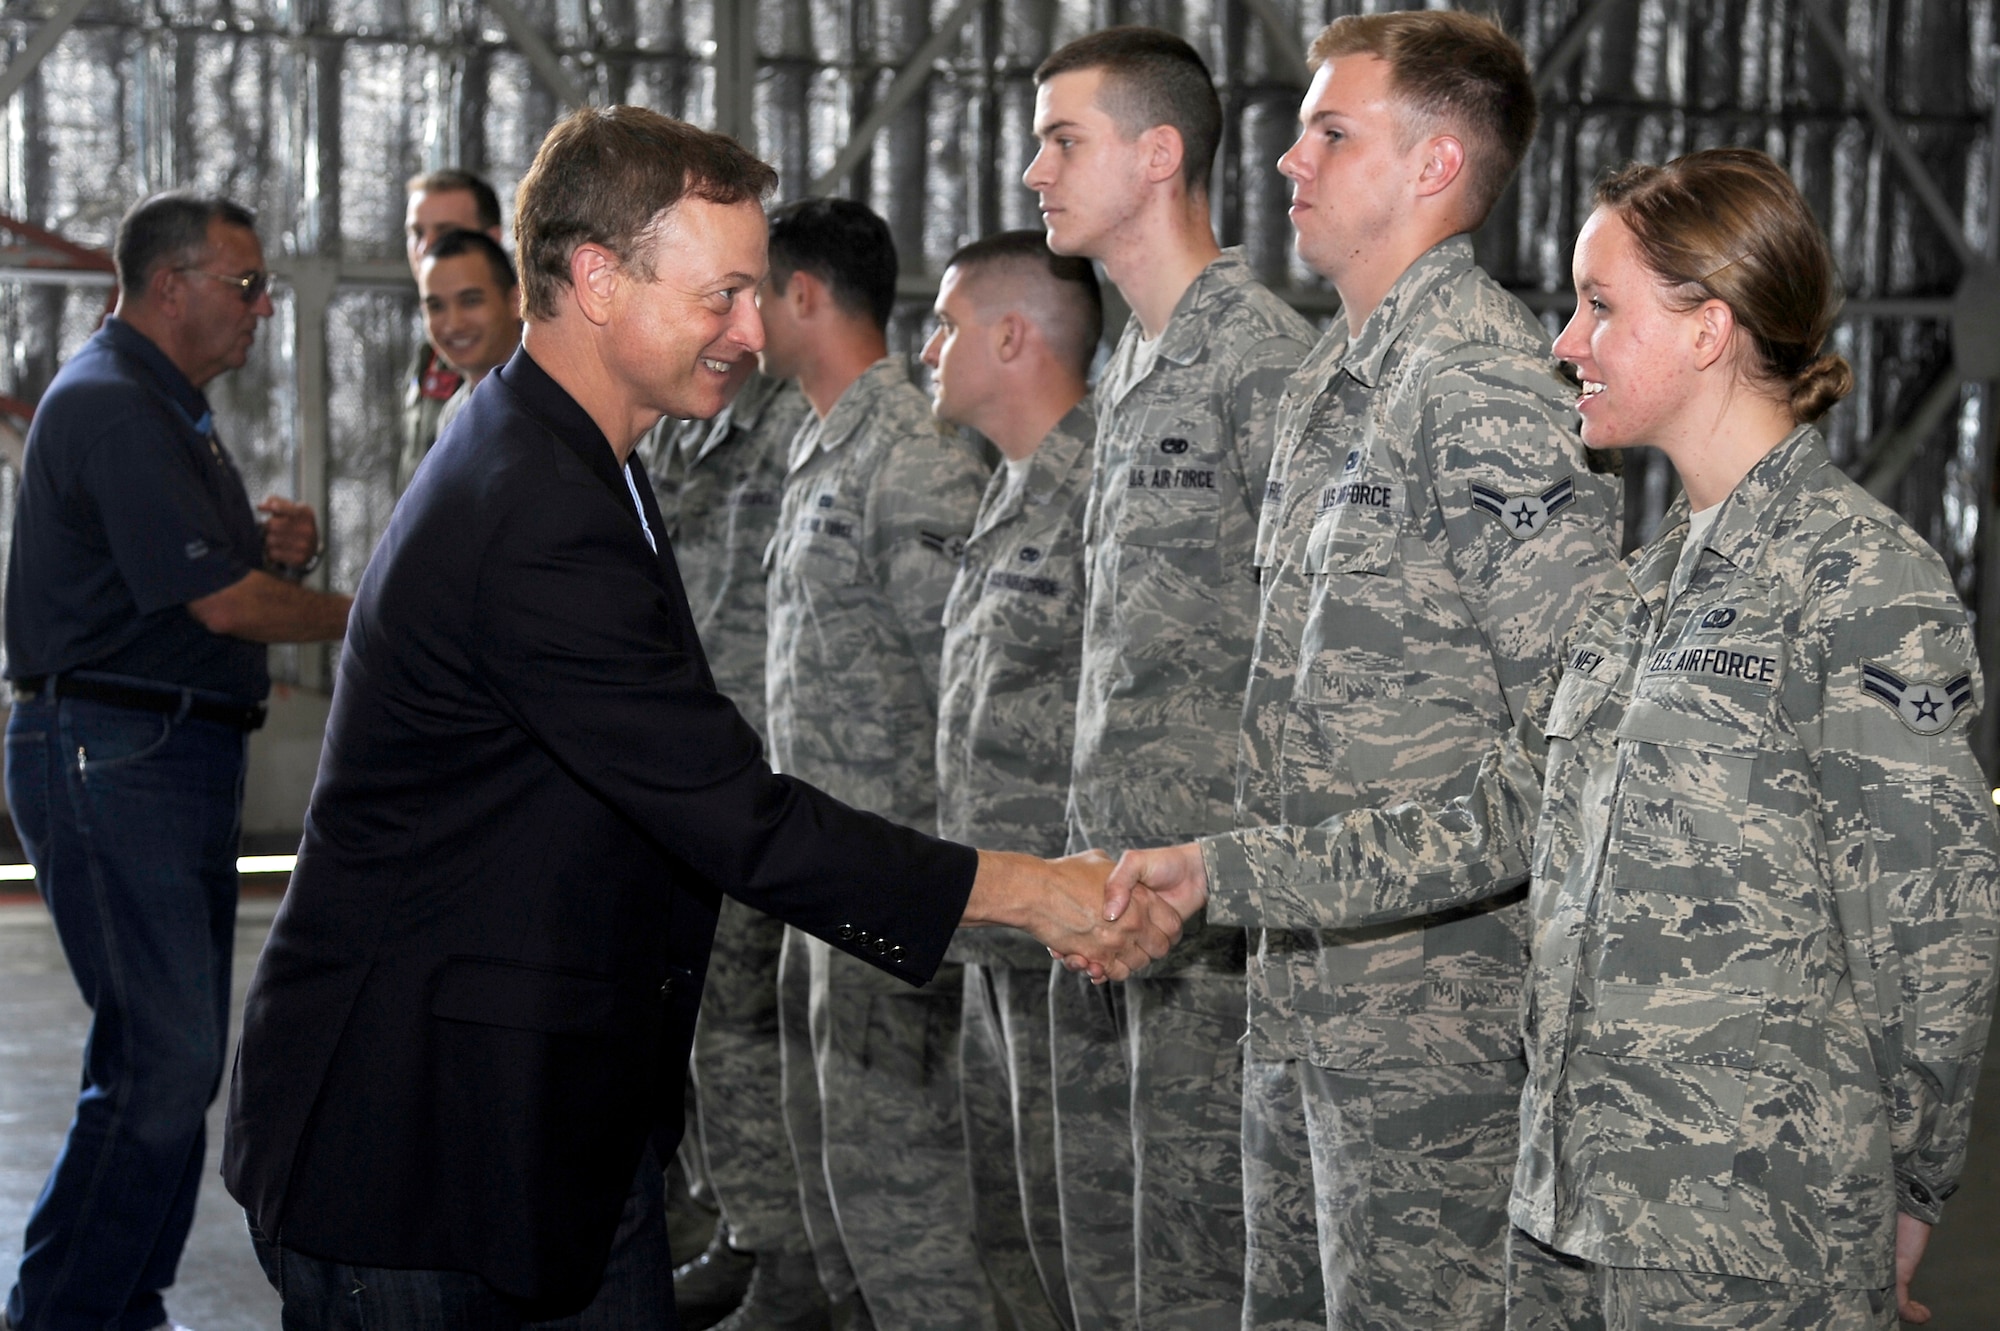 Gary Sinise shakes hands with Airmen of the 35th Aircraft Maintenance Squadron during a recent visit to Misawa Air Base, Japan, July 2, 2013. The visit was part of a United Service Organizations tour, which was orchestrated to support morale for service members and their families. (U.S. Air Force photo by Tech. Sgt. Marie Brown)
